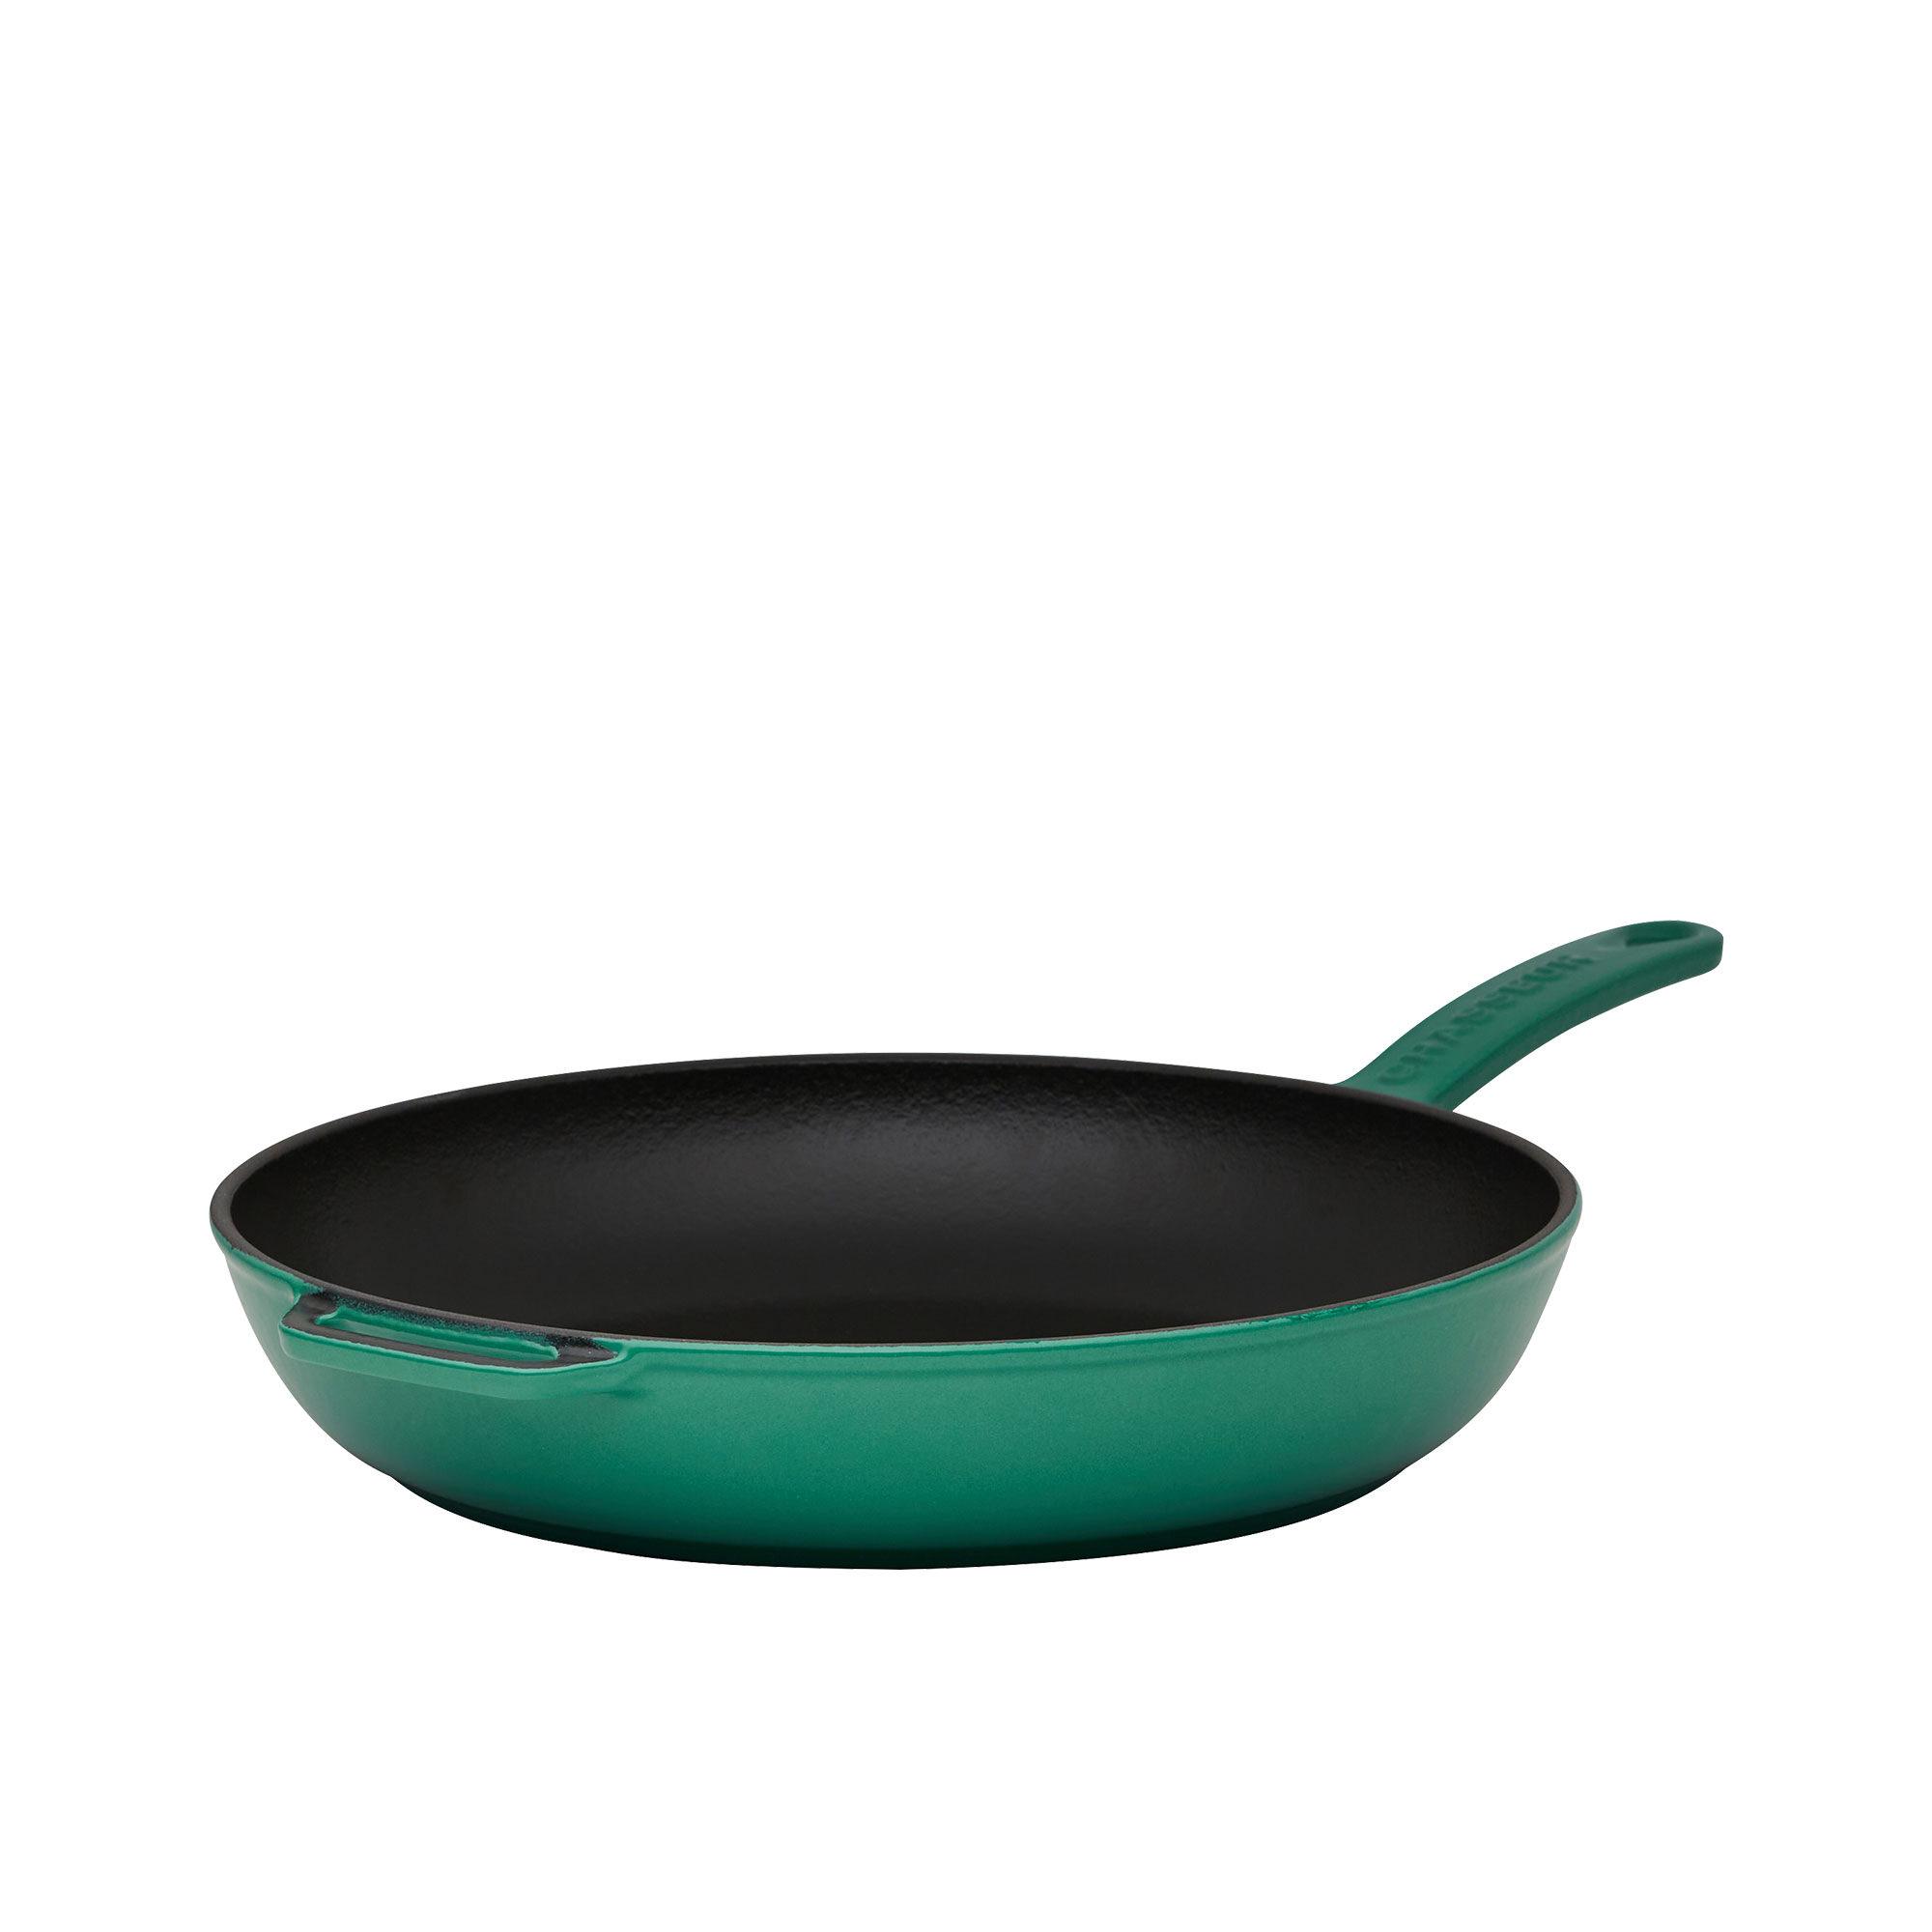 Chasseur Enamelled Cast Iron Frypan 28cm Emerald Green Image 1